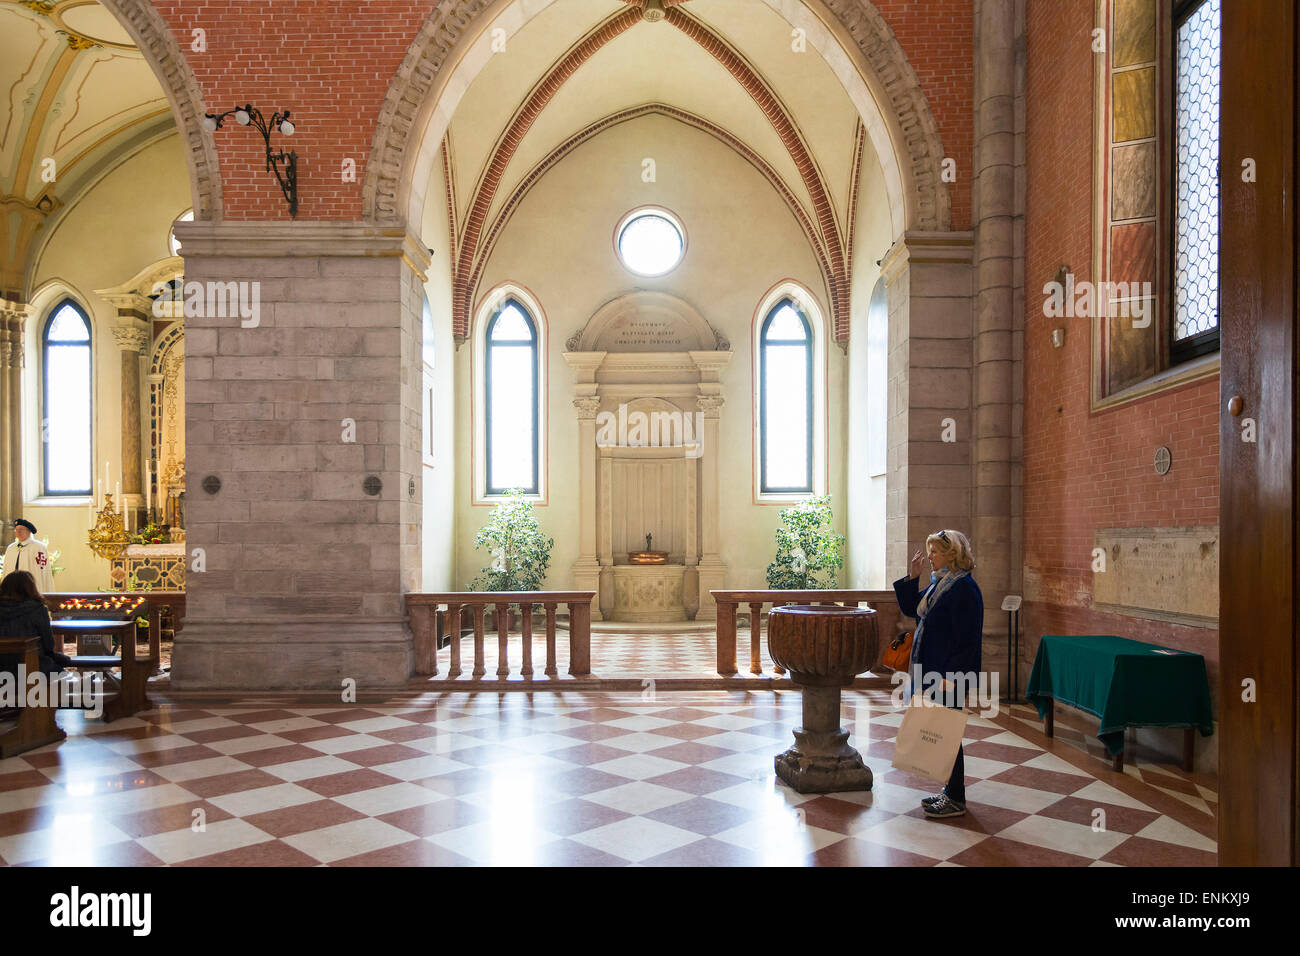 Vicenza,Italy-April 3,2015:A woman makes the sign of the cross before entering in the dome of Santa Maria Annunziata in the cent Stock Photo